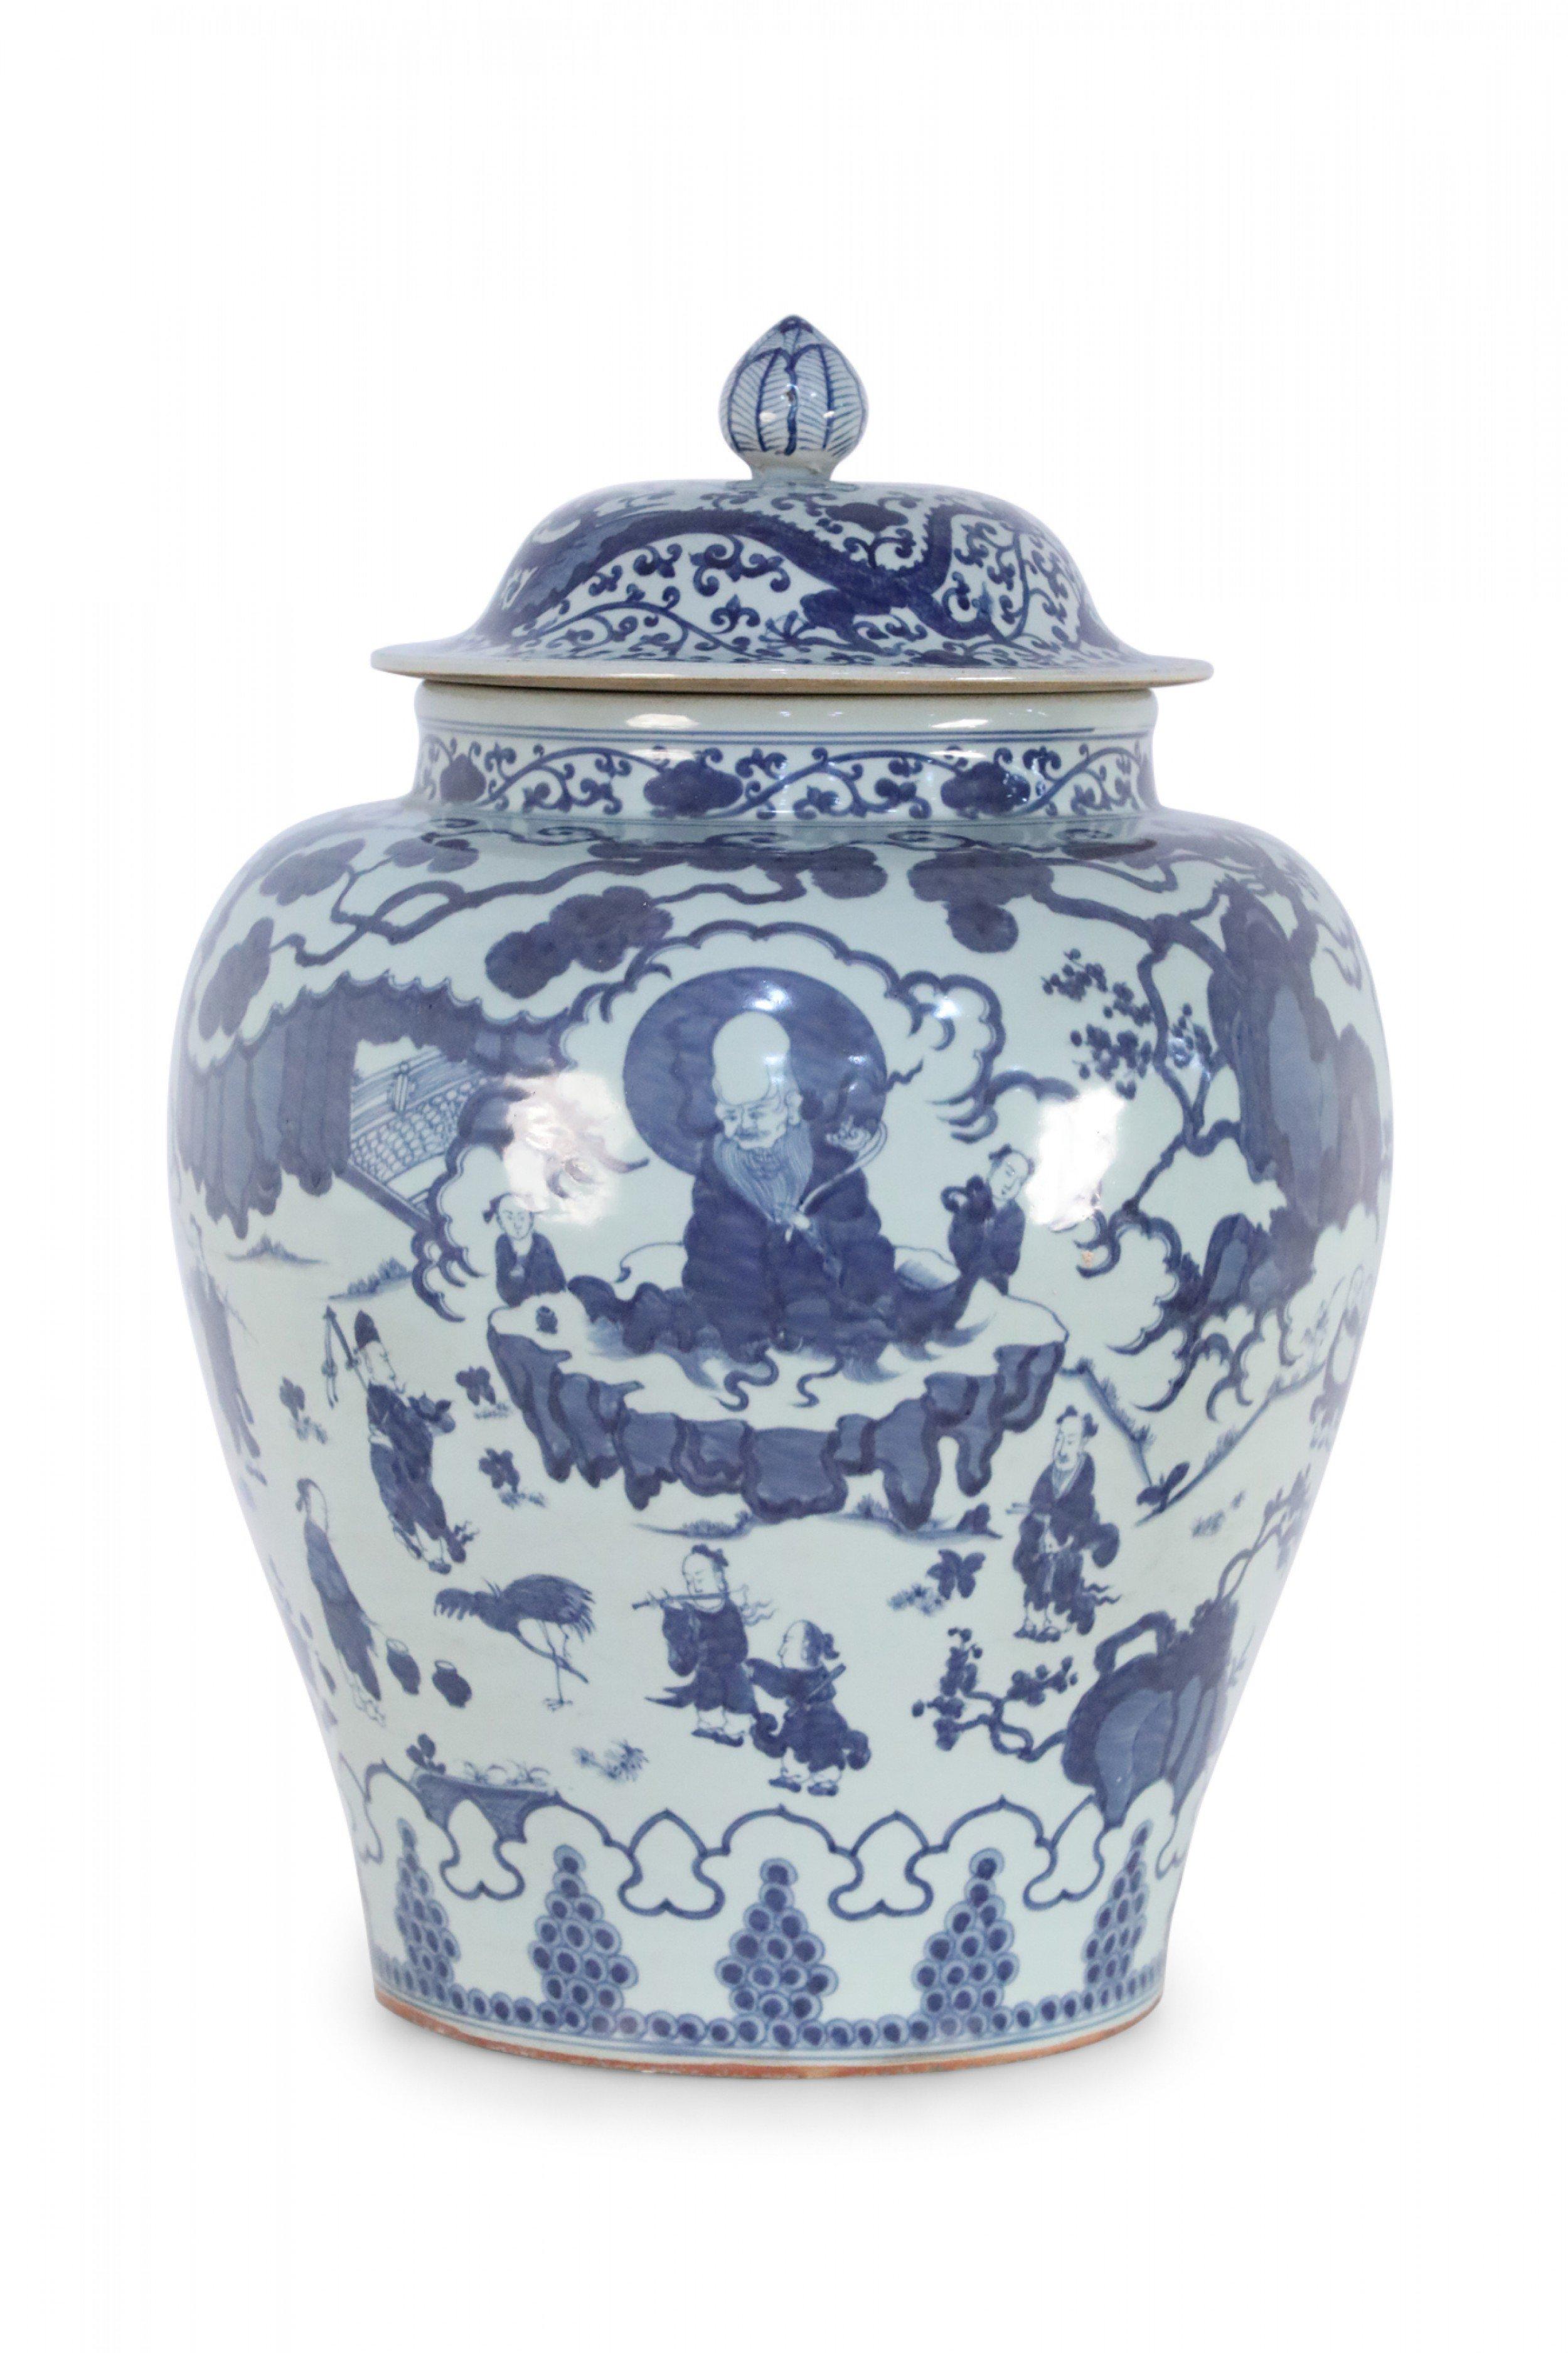 Chinese white porcelain ginger jar decorated with blue figures amid scroll detailing with a finial topped lid.
 